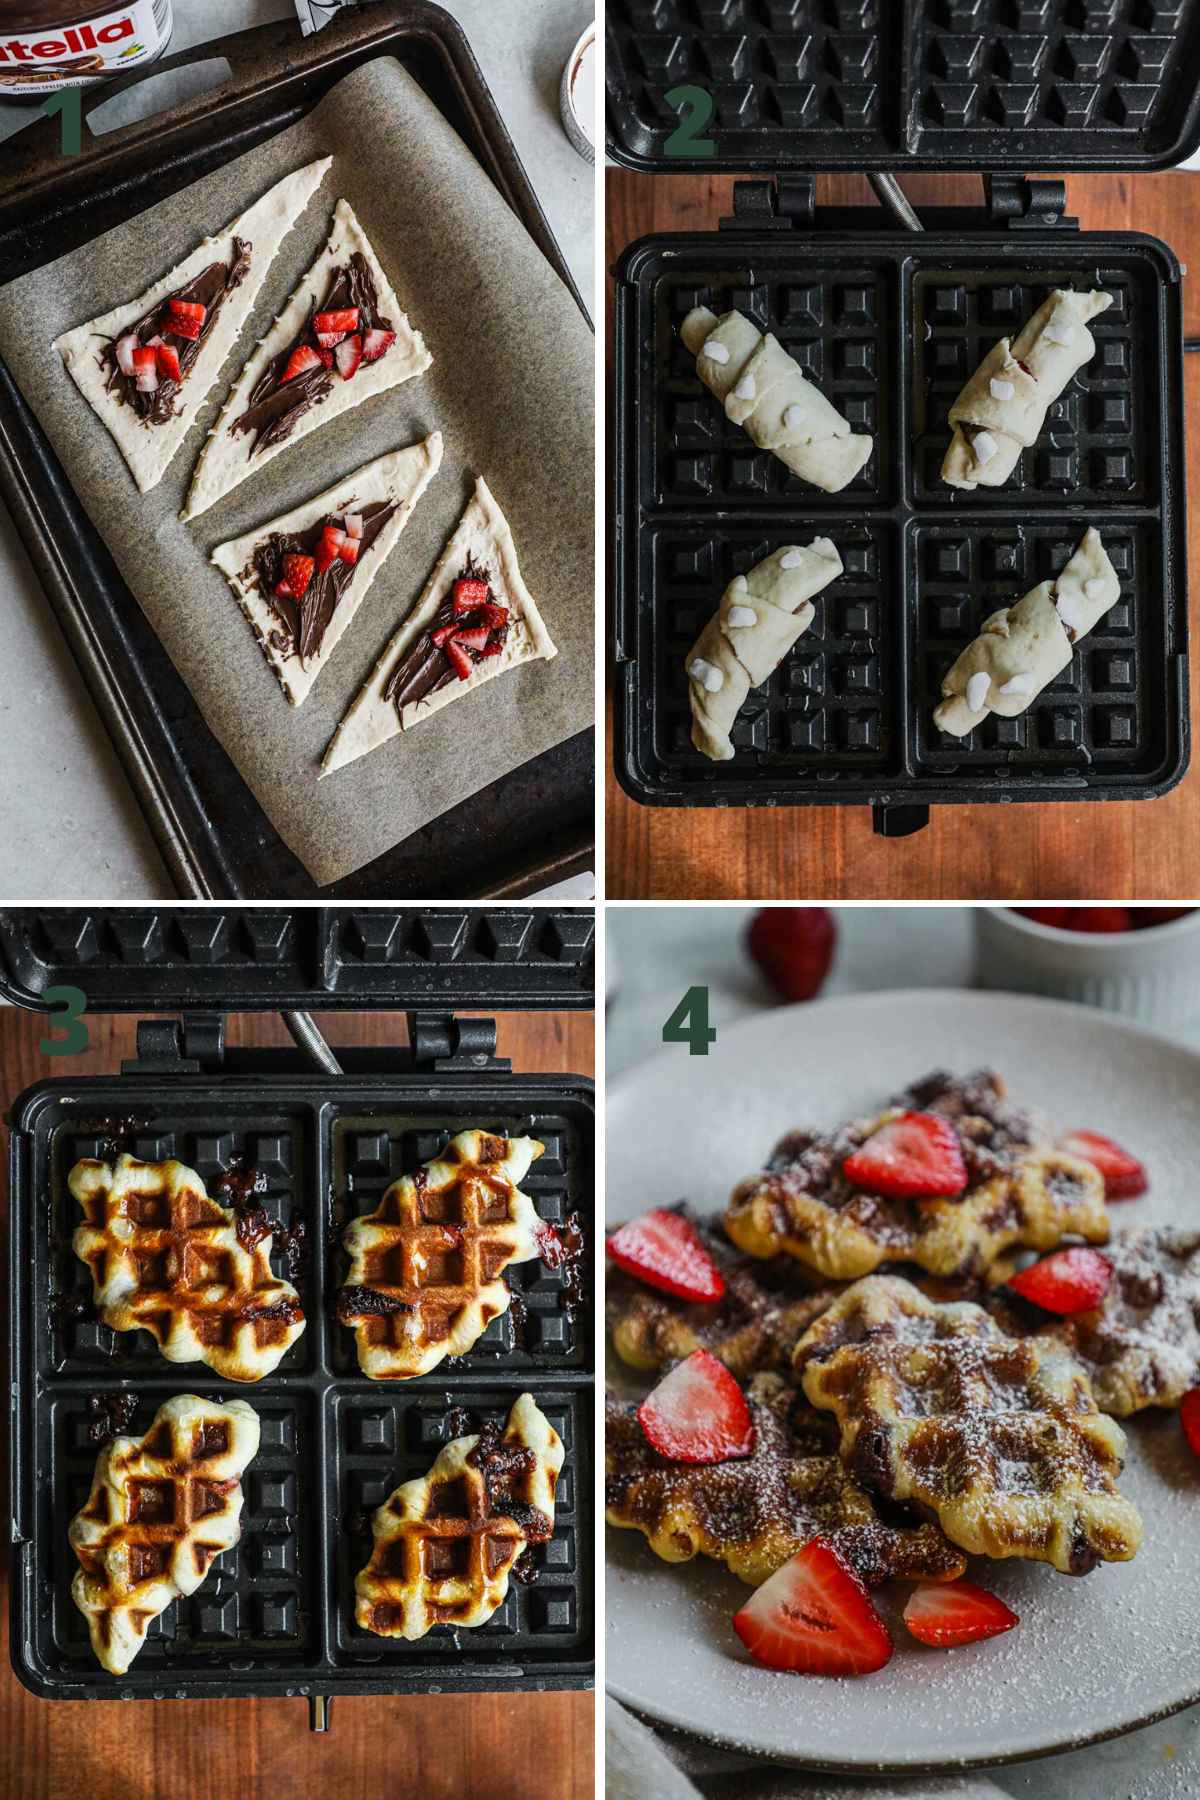 Steps to make croffles (croissant waffles), unroll crescent rolls or puff pastry, layer fillings, roll, cook in waffles iron, and serve.